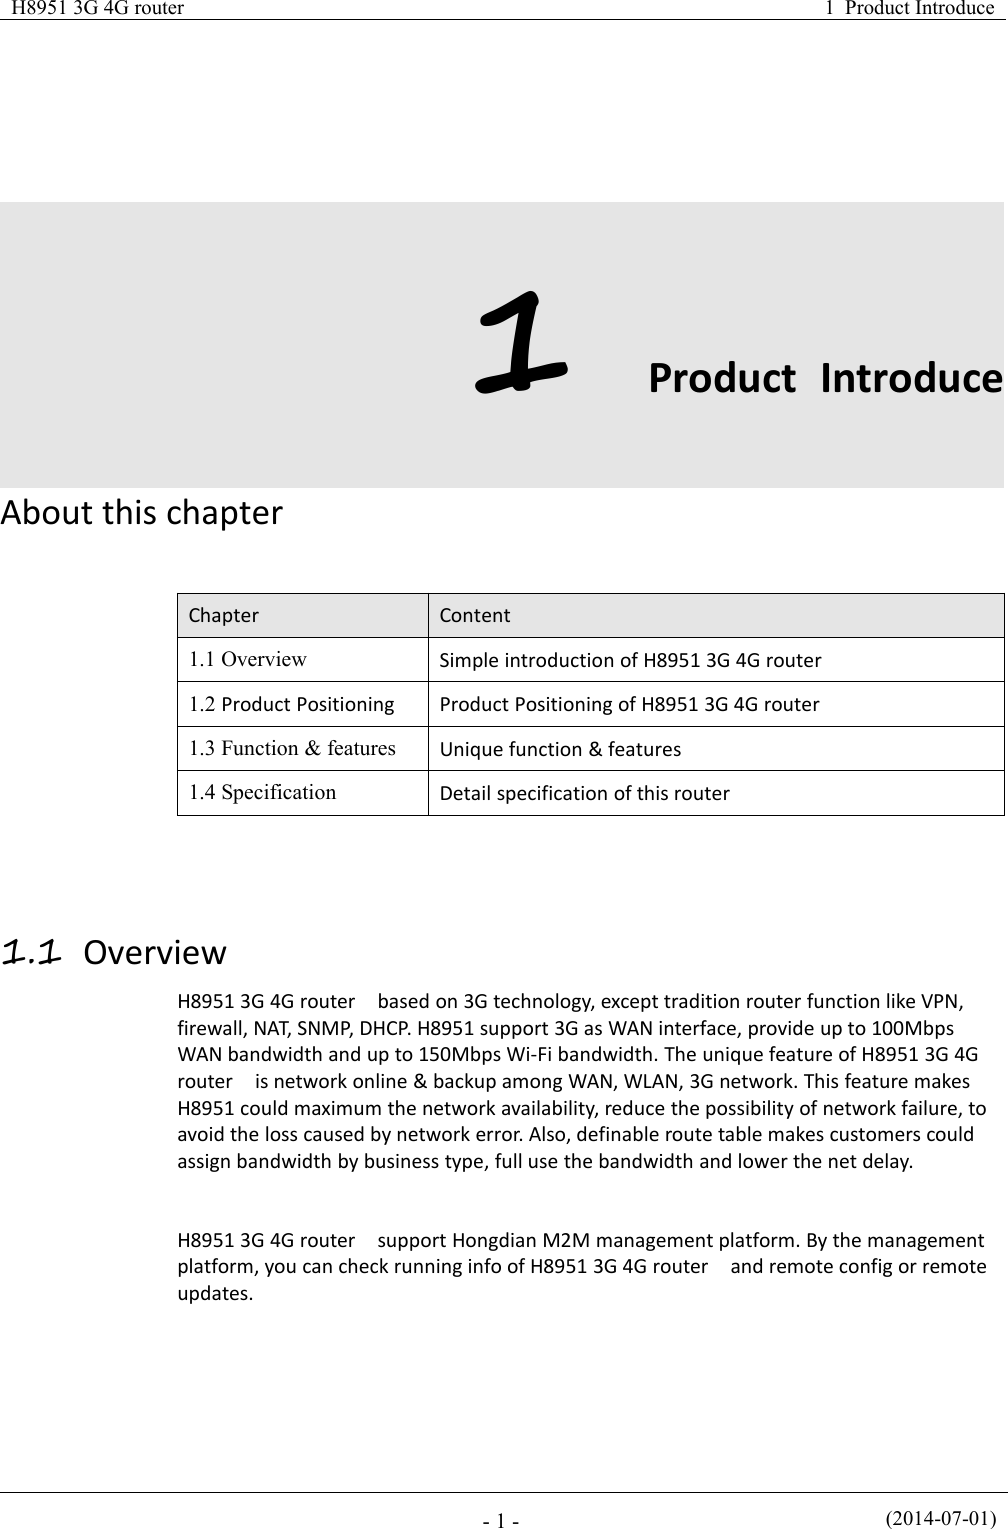 H8951 3G 4G router1 Product Introduce(2014-07-01)- 1 -1Product IntroduceAbout this chapterChapterContent1.1 OverviewSimple introduction of H8951 3G 4G router1.2 Product PositioningProduct Positioning of H8951 3G 4G router1.3 Function &amp; featuresUnique function &amp; features1.4 SpecificationDetail specification of this router1.1 OverviewH8951 3G 4G router based on 3G technology, except tradition router function like VPN,firewall, NAT, SNMP, DHCP. H8951 support 3G as WAN interface, provide up to 100MbpsWAN bandwidth and up to 150Mbps Wi-Fi bandwidth. The unique feature of H8951 3G 4Grouter is network online &amp; backup among WAN, WLAN, 3G network. This feature makesH8951 could maximum the network availability, reduce the possibility of network failure, toavoid the loss caused by network error. Also, definable route table makes customers couldassign bandwidth by business type, full use the bandwidth and lower the net delay.H8951 3G 4G router support Hongdian M2M management platform. By the managementplatform, you can check running info of H8951 3G 4G router and remote config or remoteupdates.